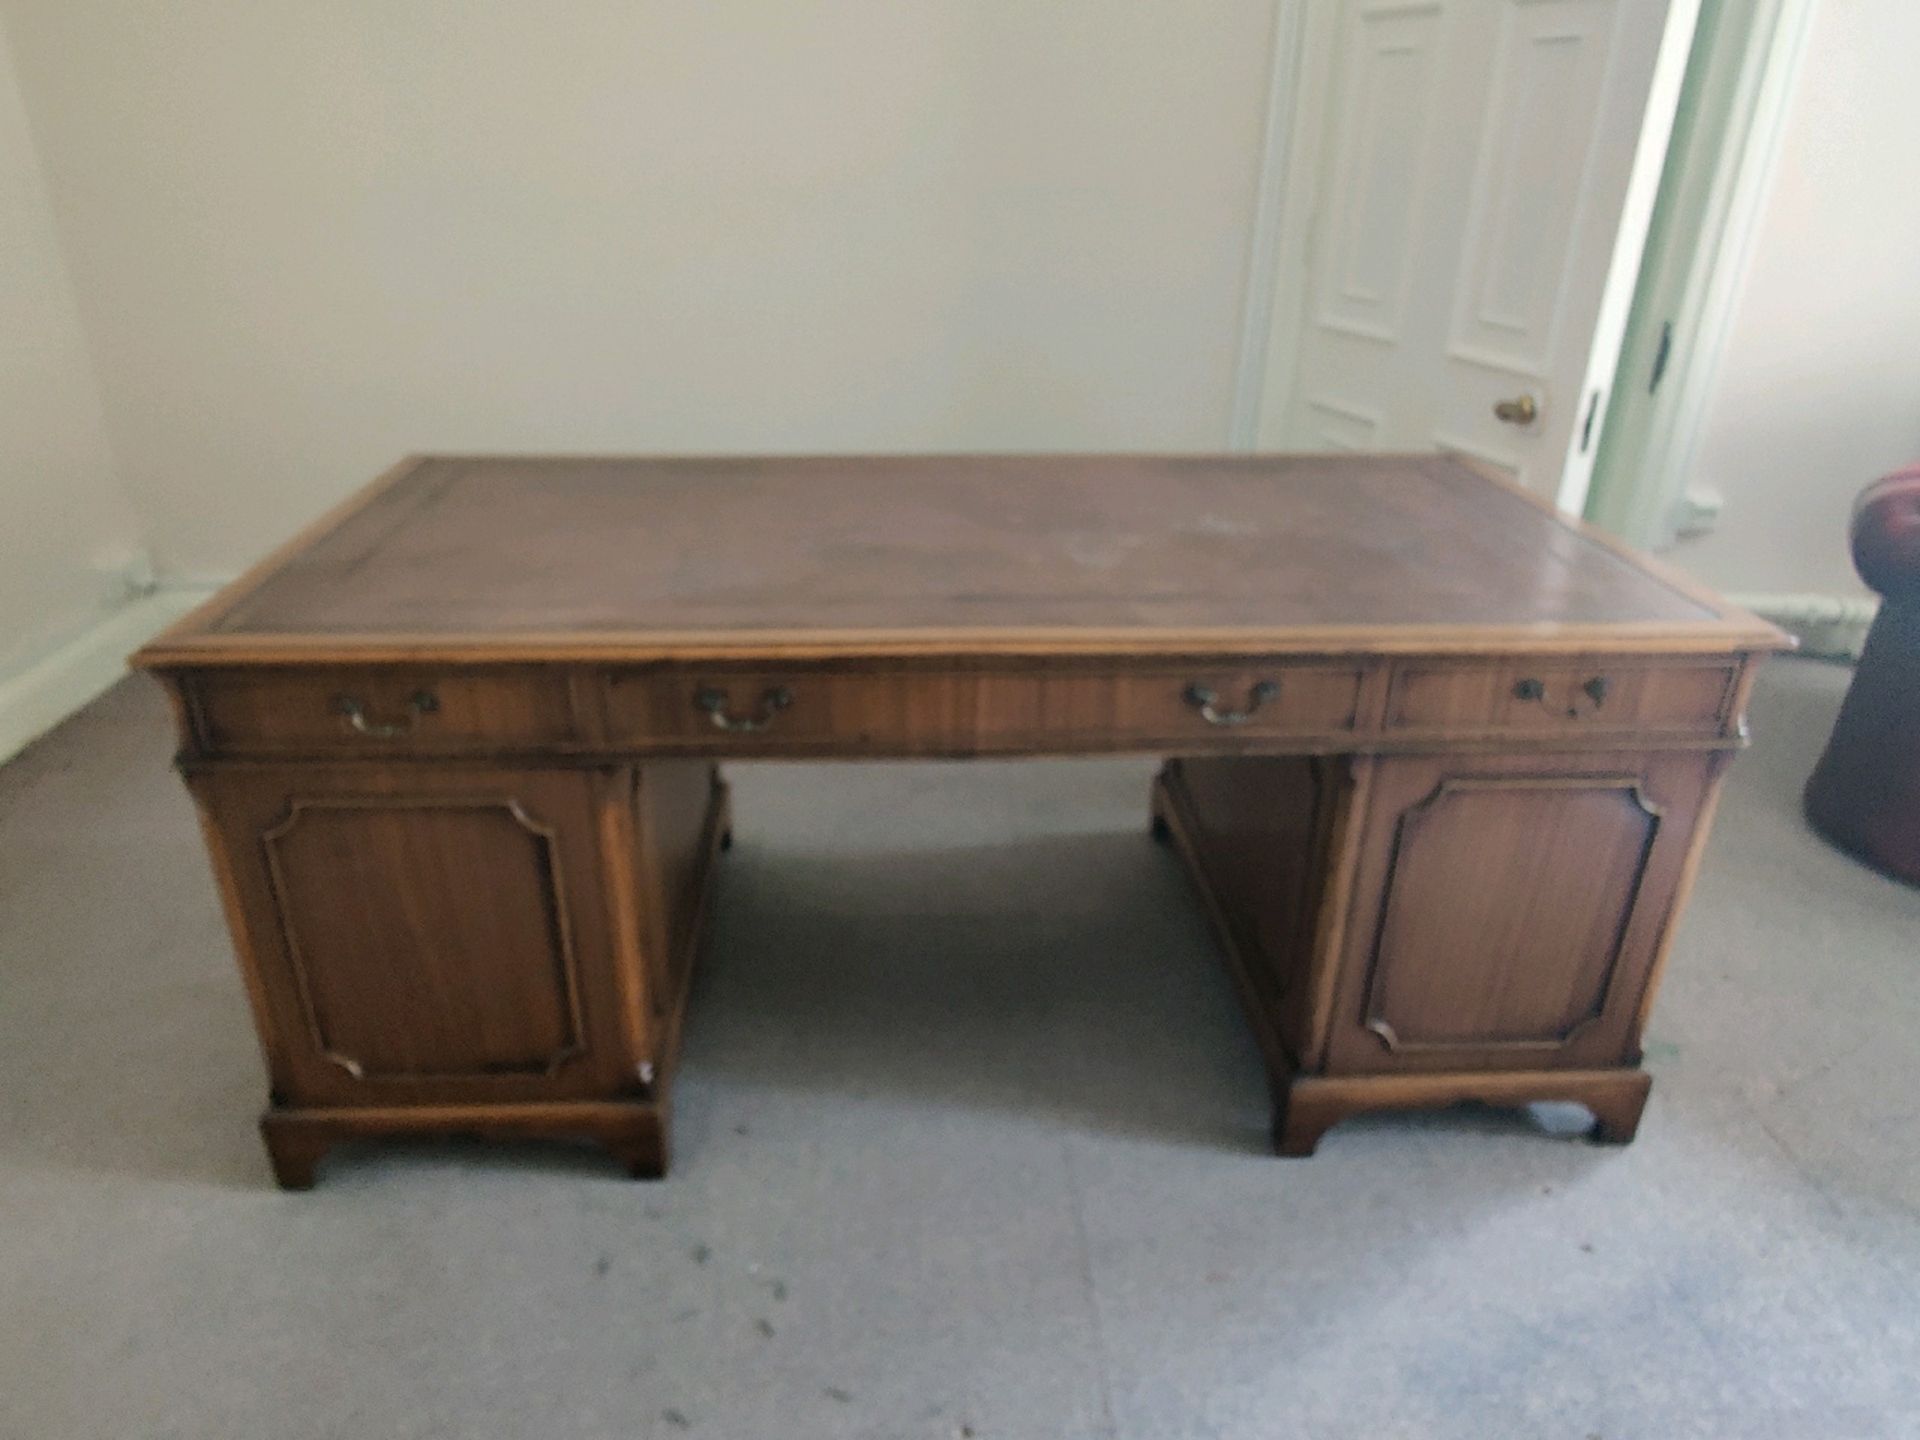 Wooden table with draws - Image 3 of 3